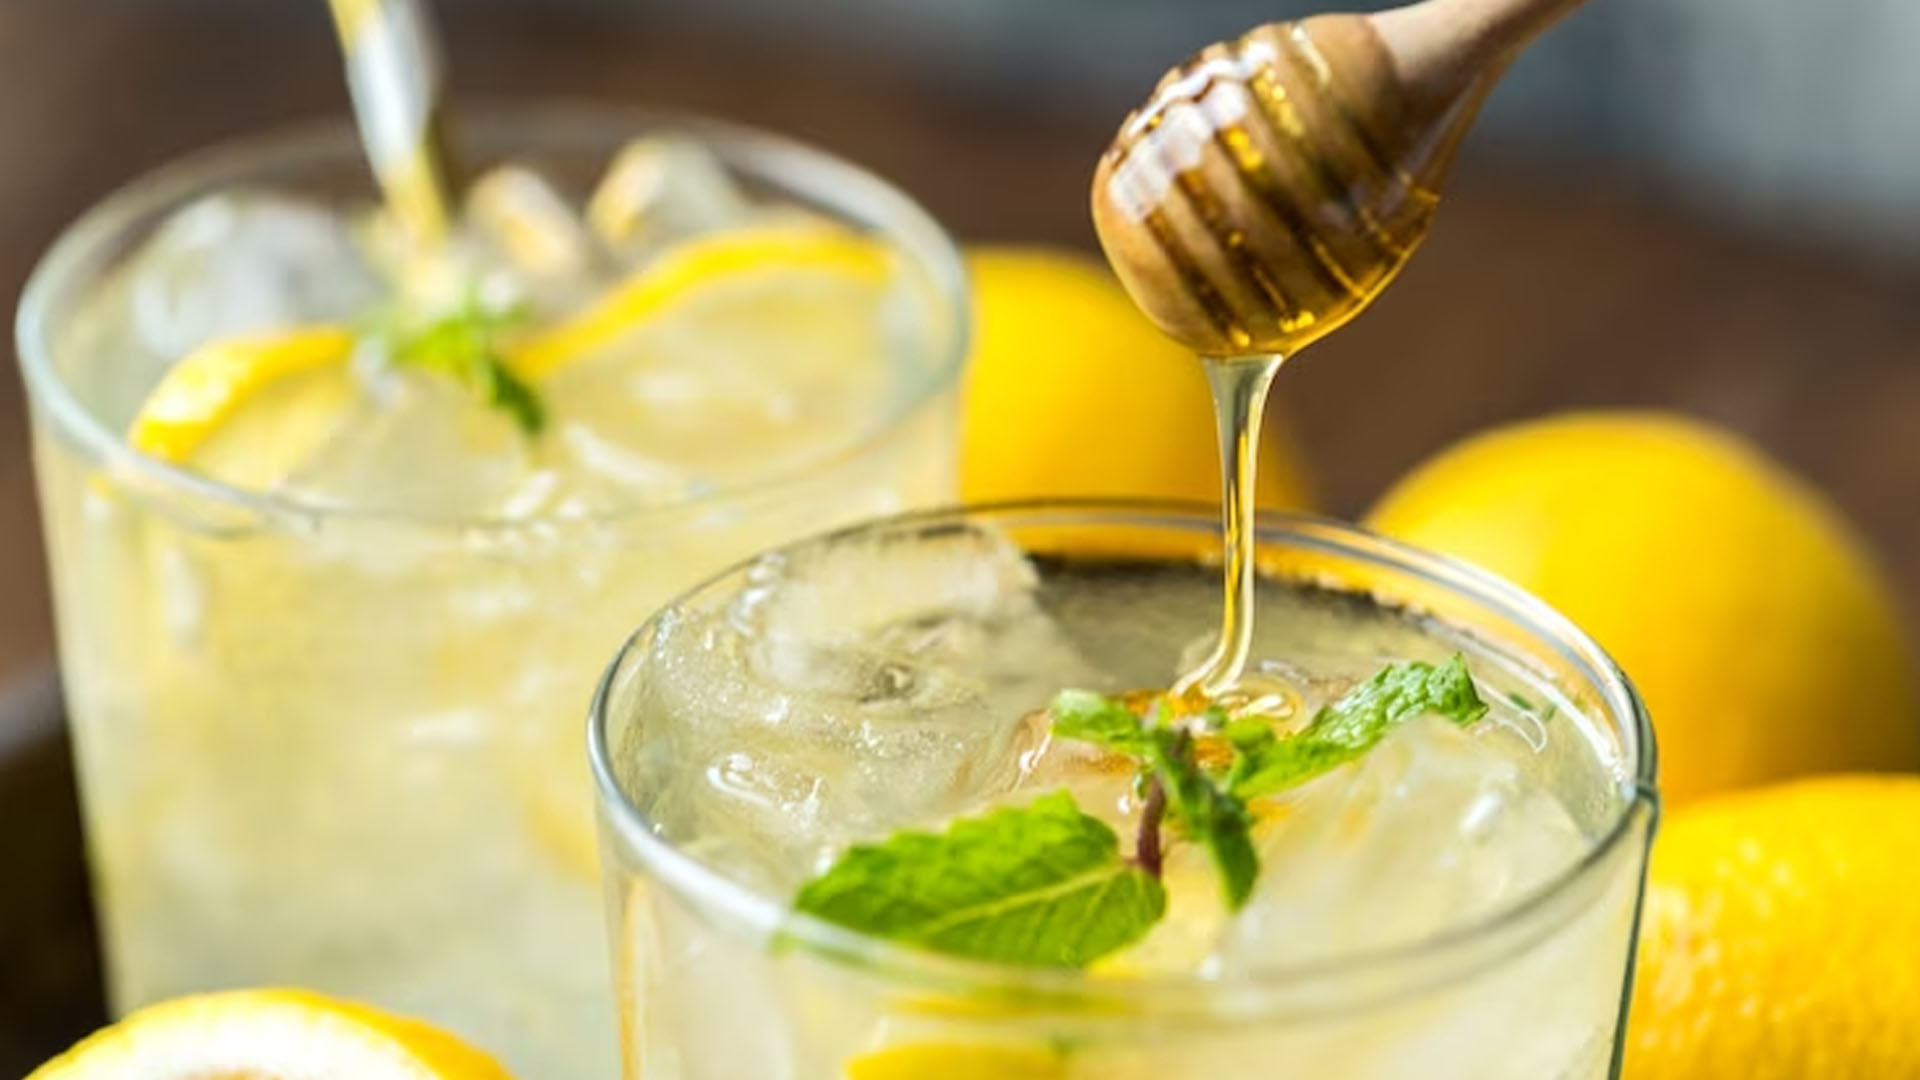 What Are The Health Benefits of Honey and Lemon Water?